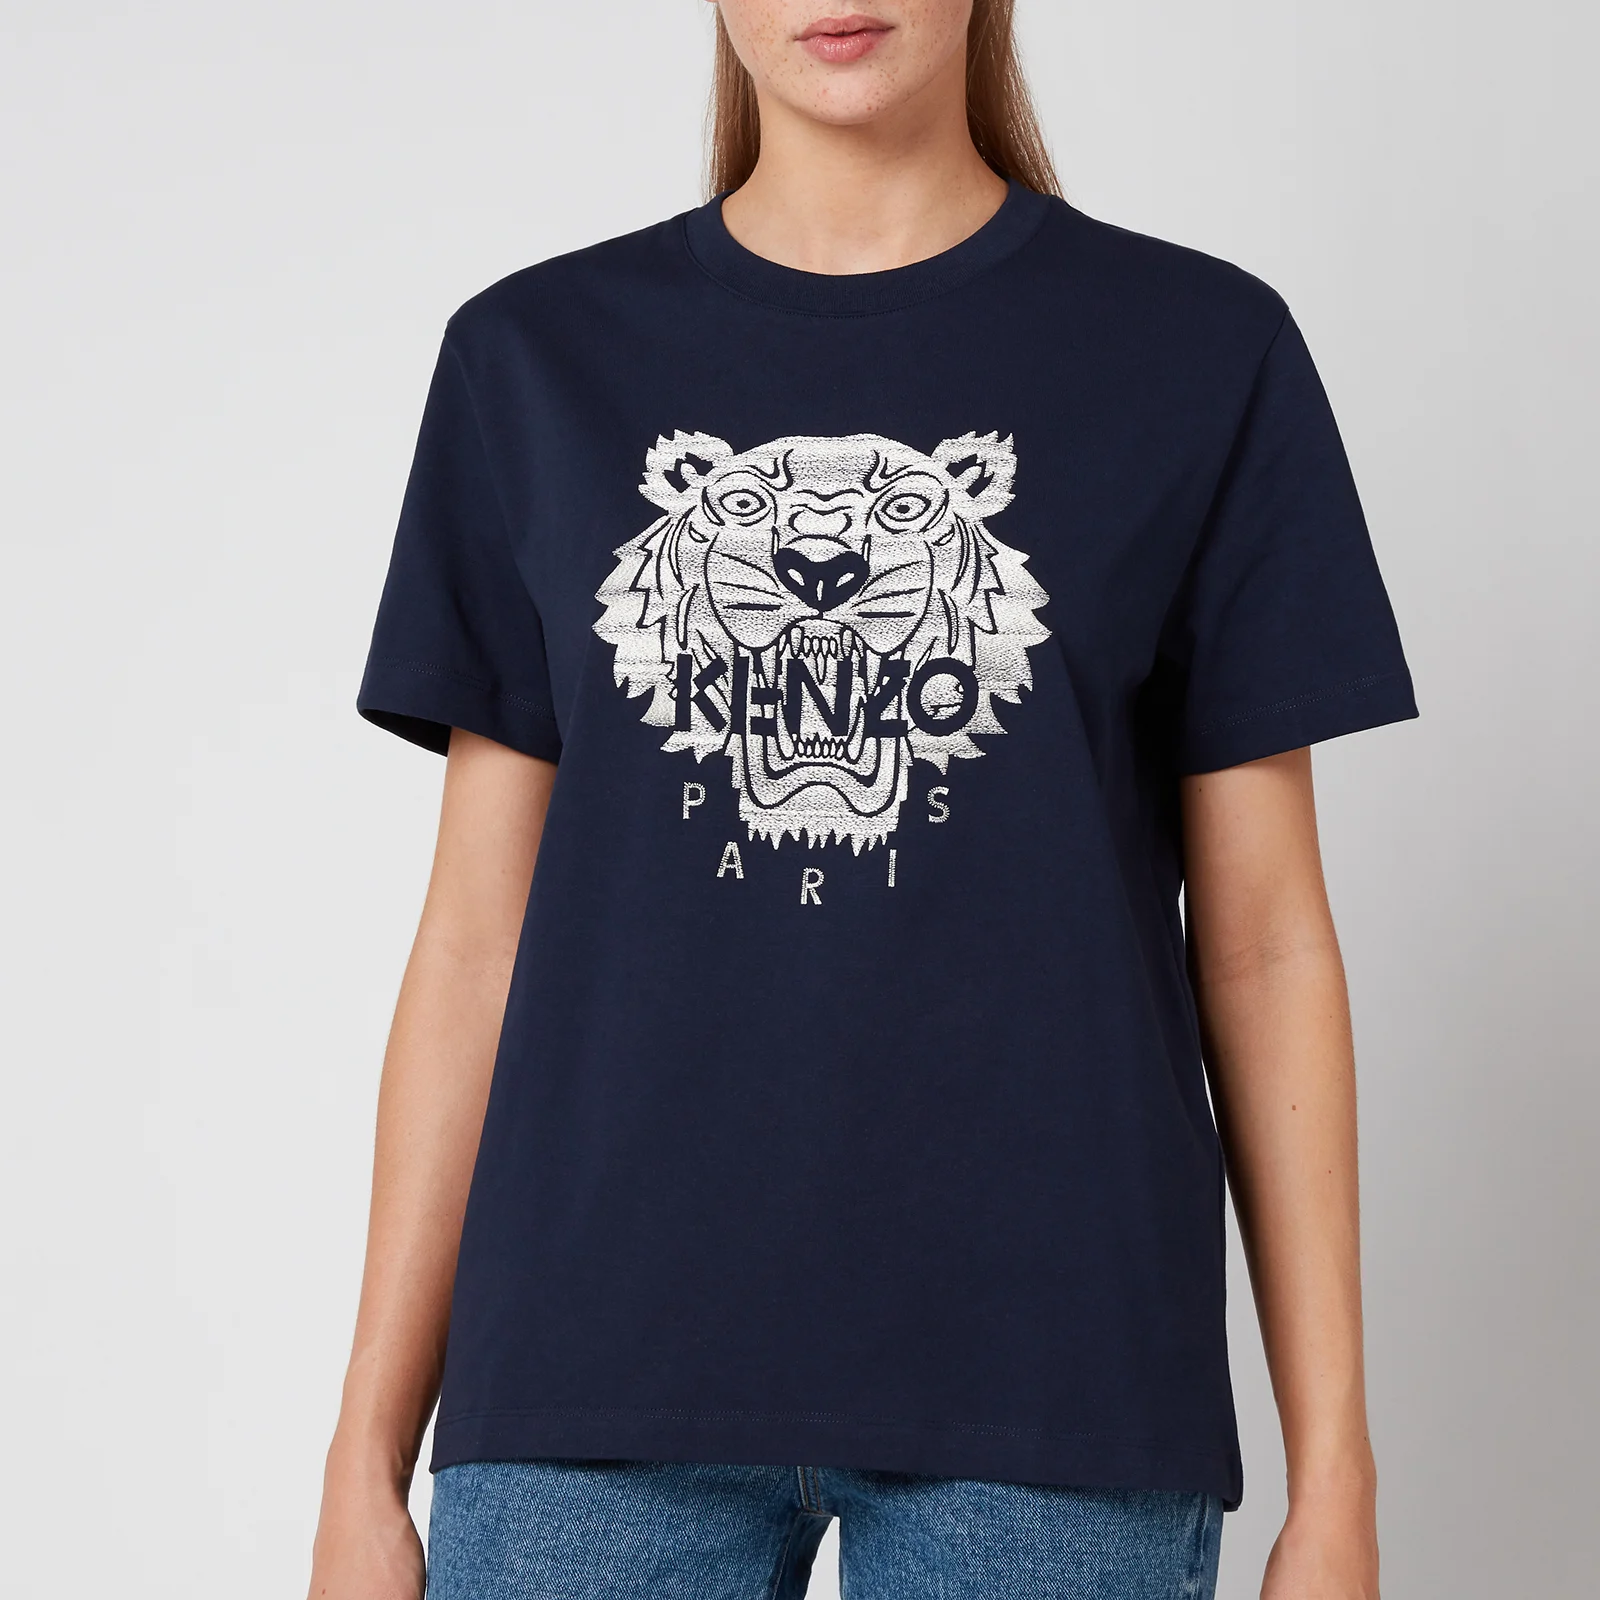 KENZO Women's Full Embroidered Loose T-Shirt - Navy Blue Image 1